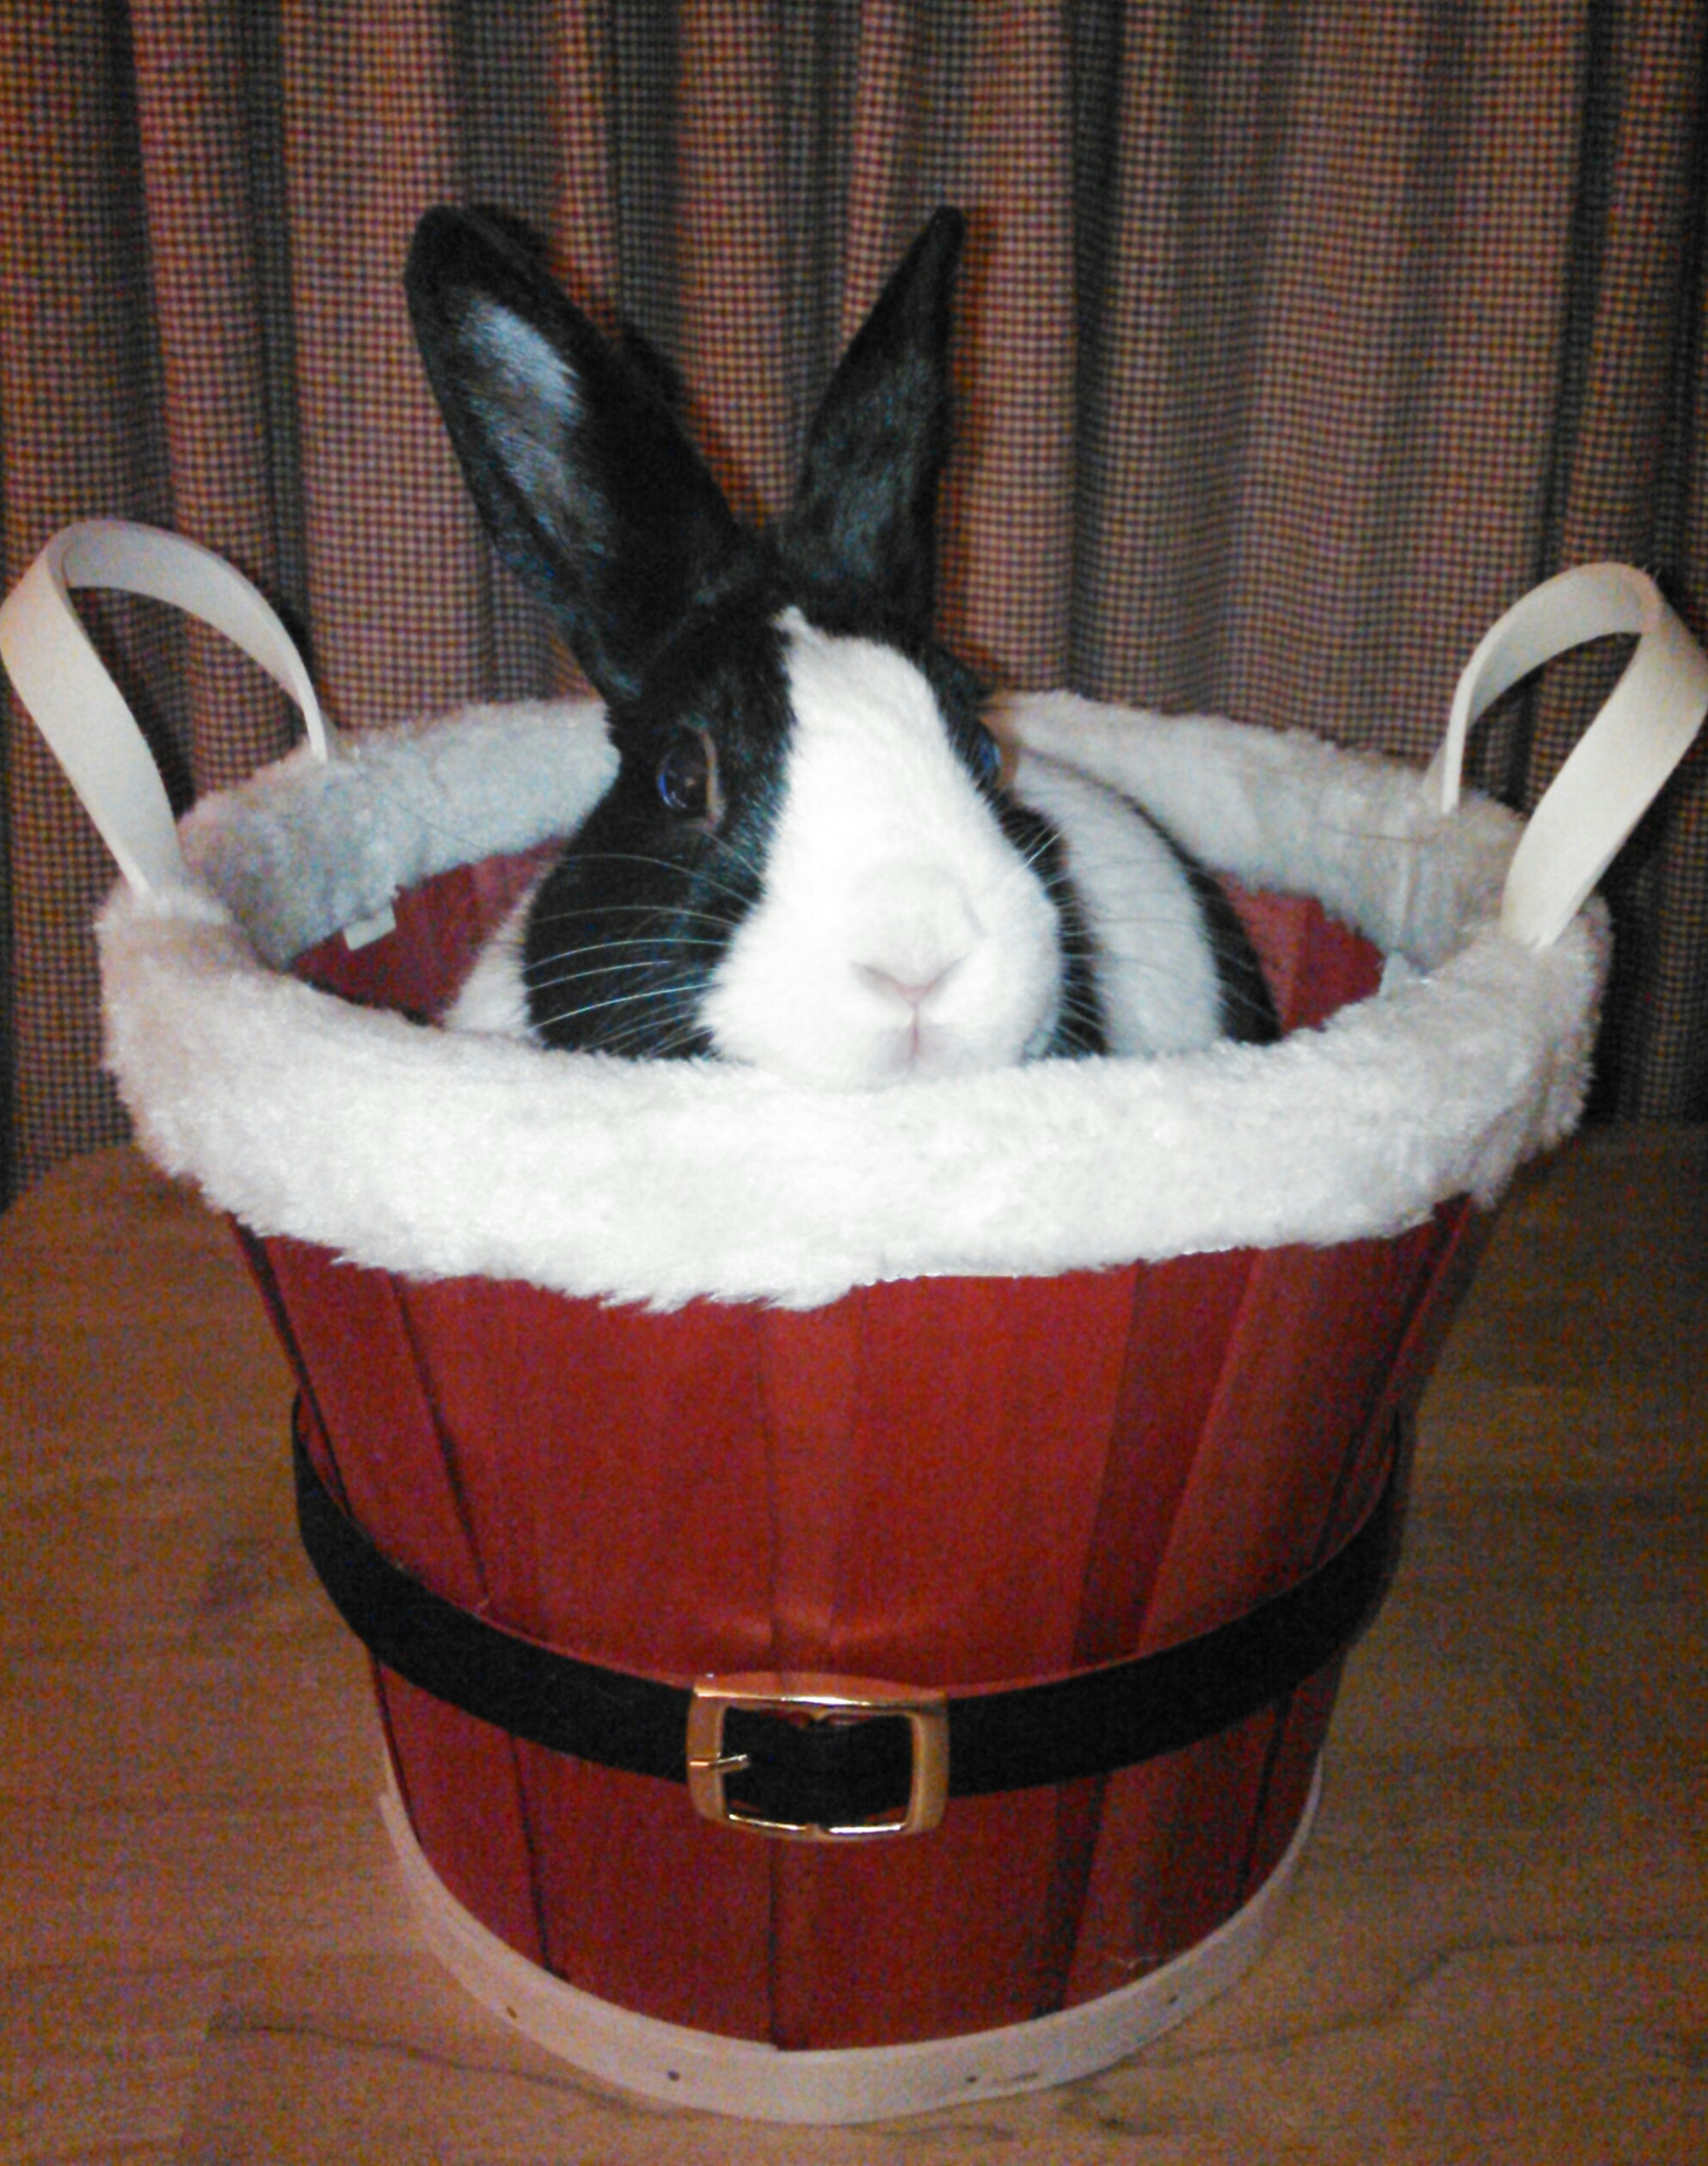 Bunny Says This Basket Is Perfect for Holiday Treats - Fill It Up!